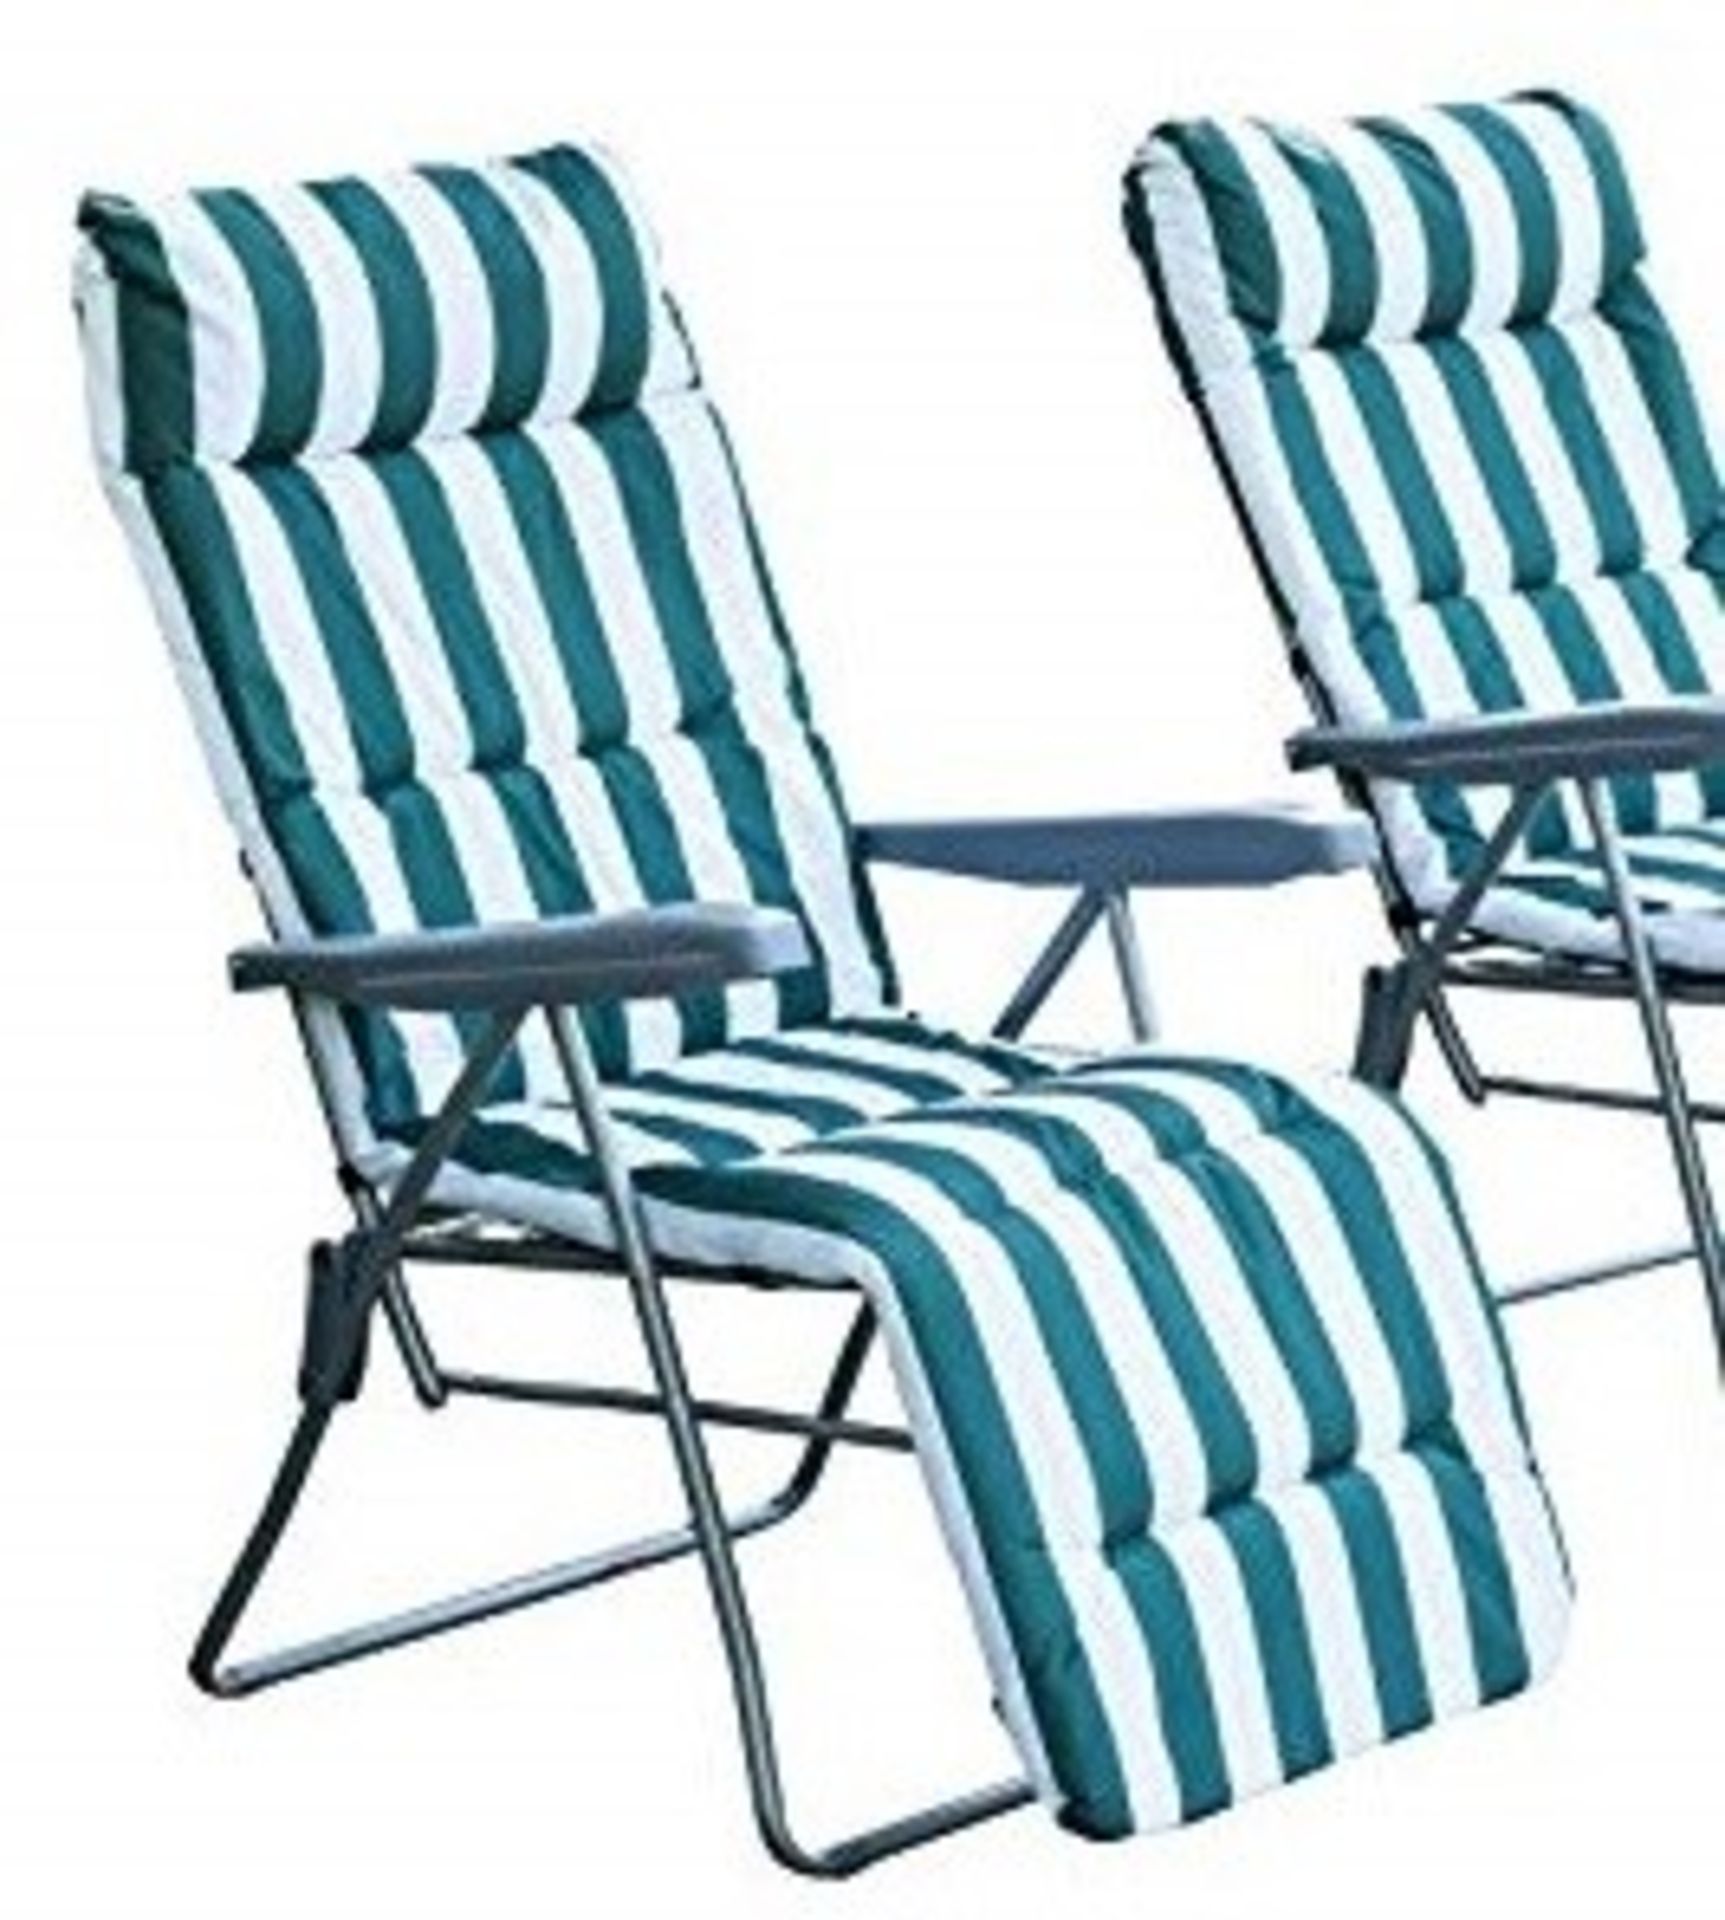 1 GRADE A BOXED OUTSUNNY GARDEN PATIO RECLINER CHAIR IN BLUE AND BLACK / RRP £74.99 (VIEWING